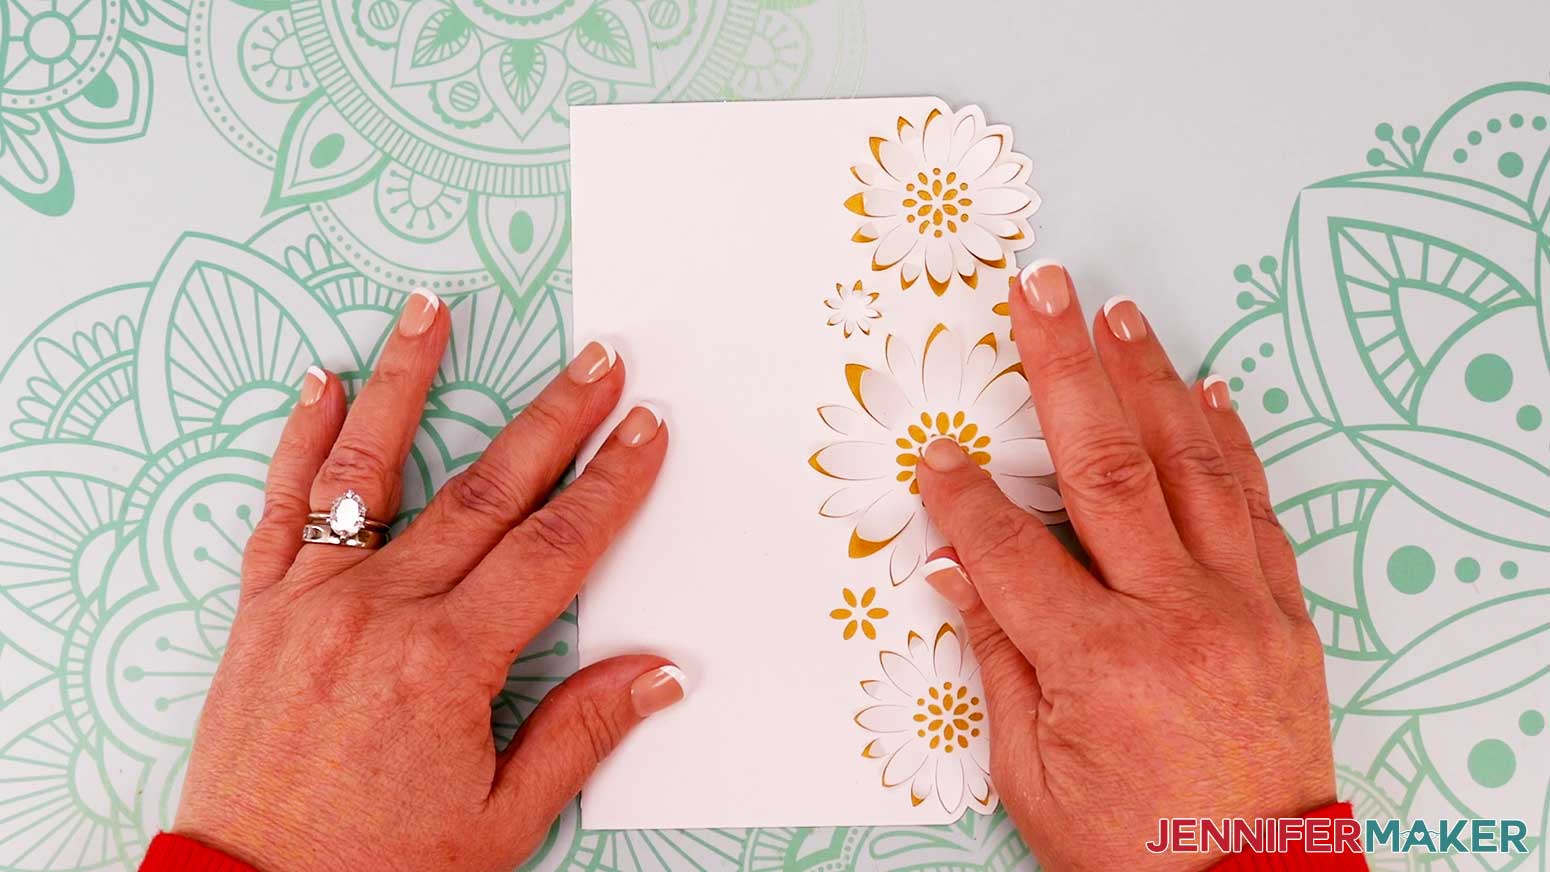 Press down in the center of the flowers to adhere them to the glued liner for the flower shaped edge card